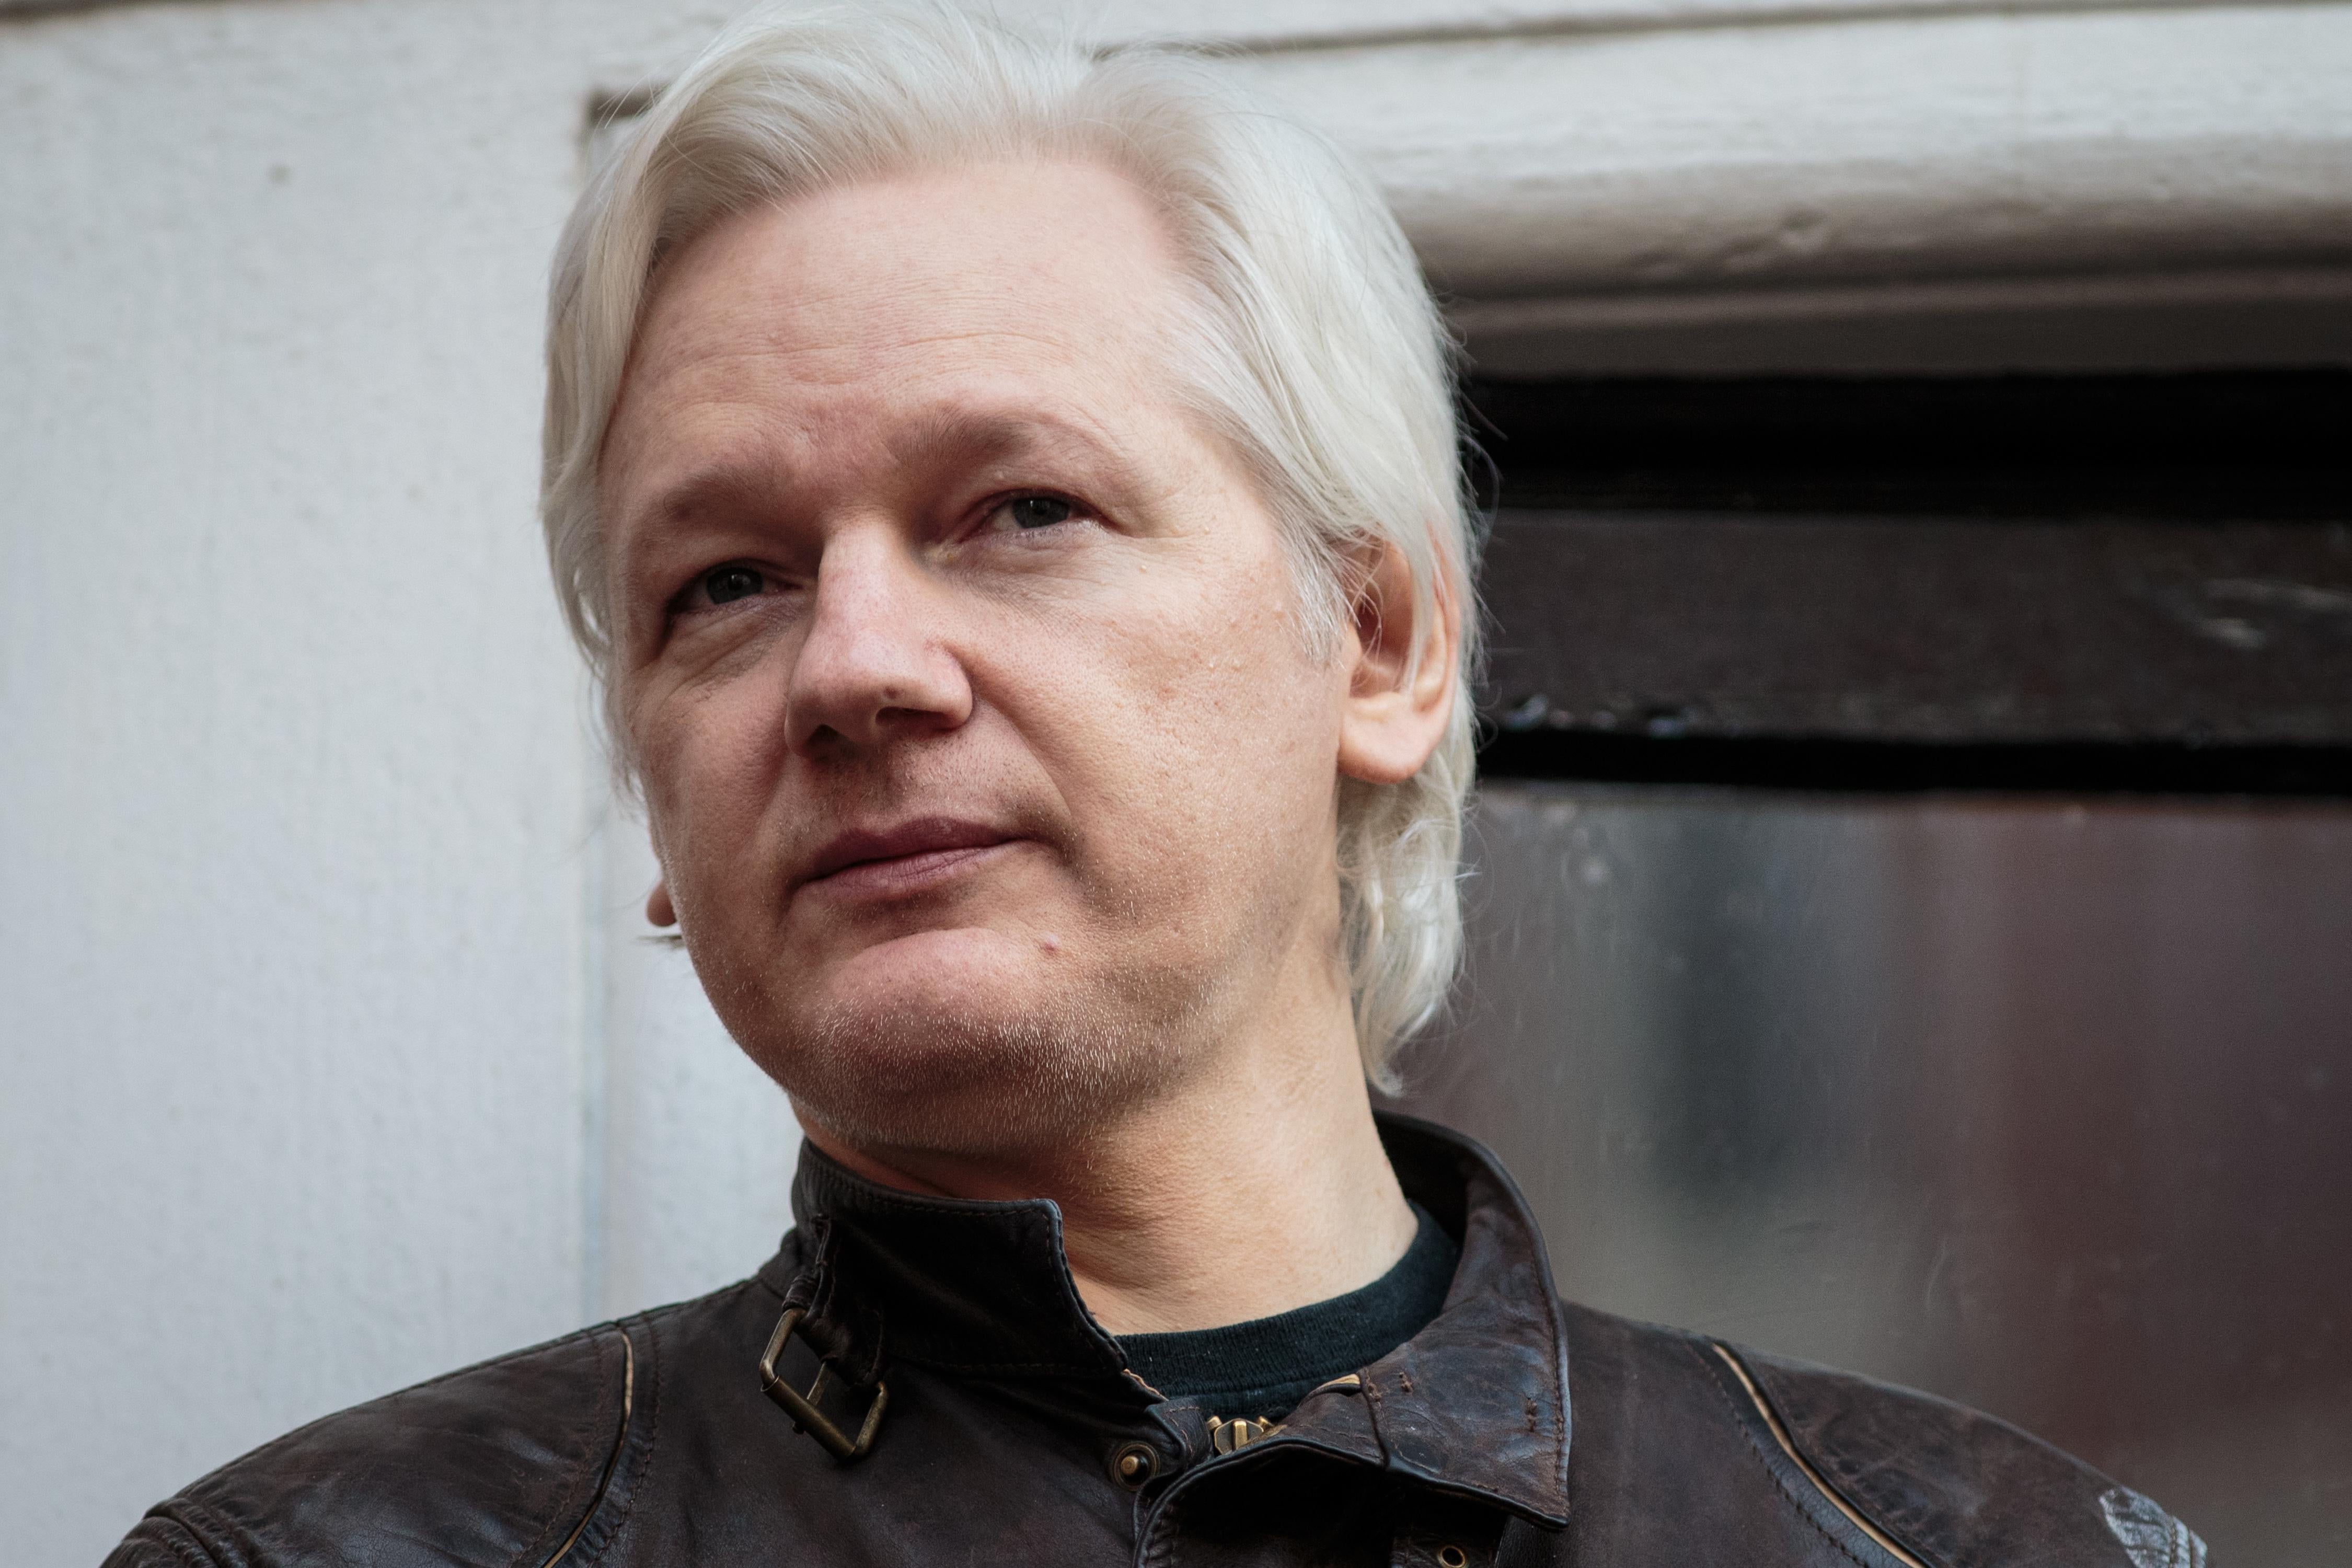 Julian Assange looks out from a balcony.